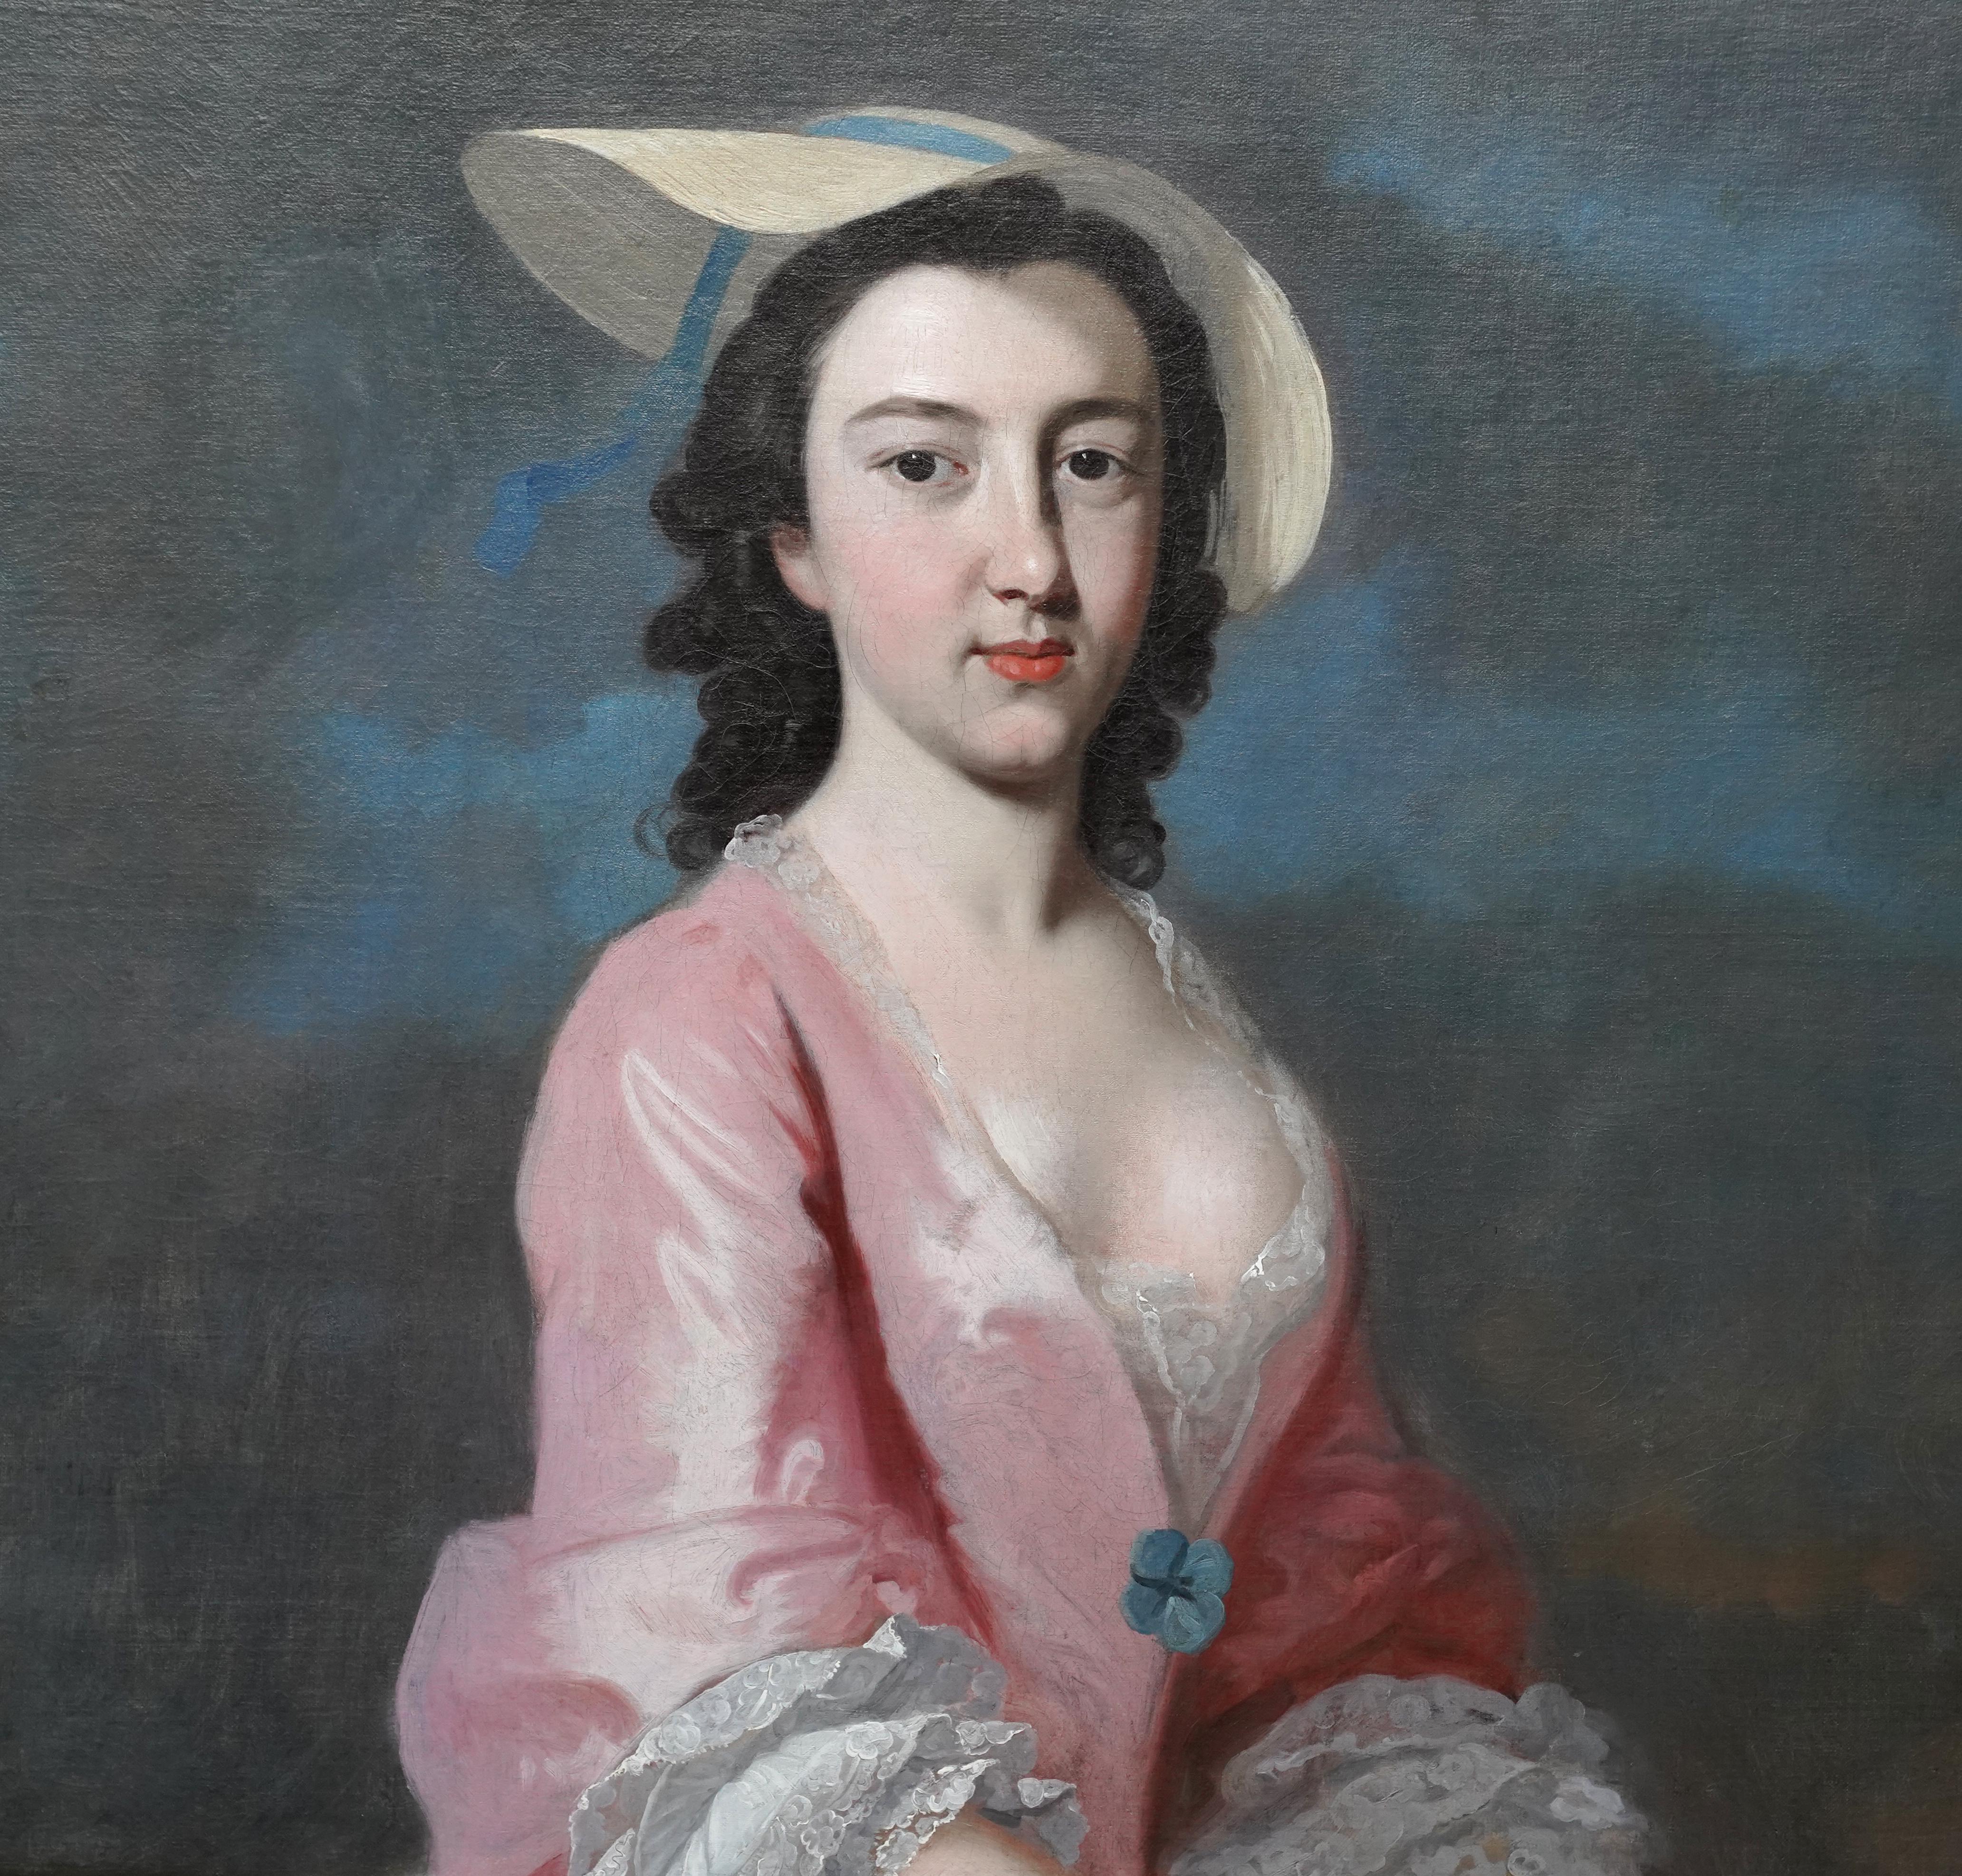 Portrait of a Lady with White Gloves - British 18thC art Old Master oil painting - Old Masters Painting by Thomas Hudson